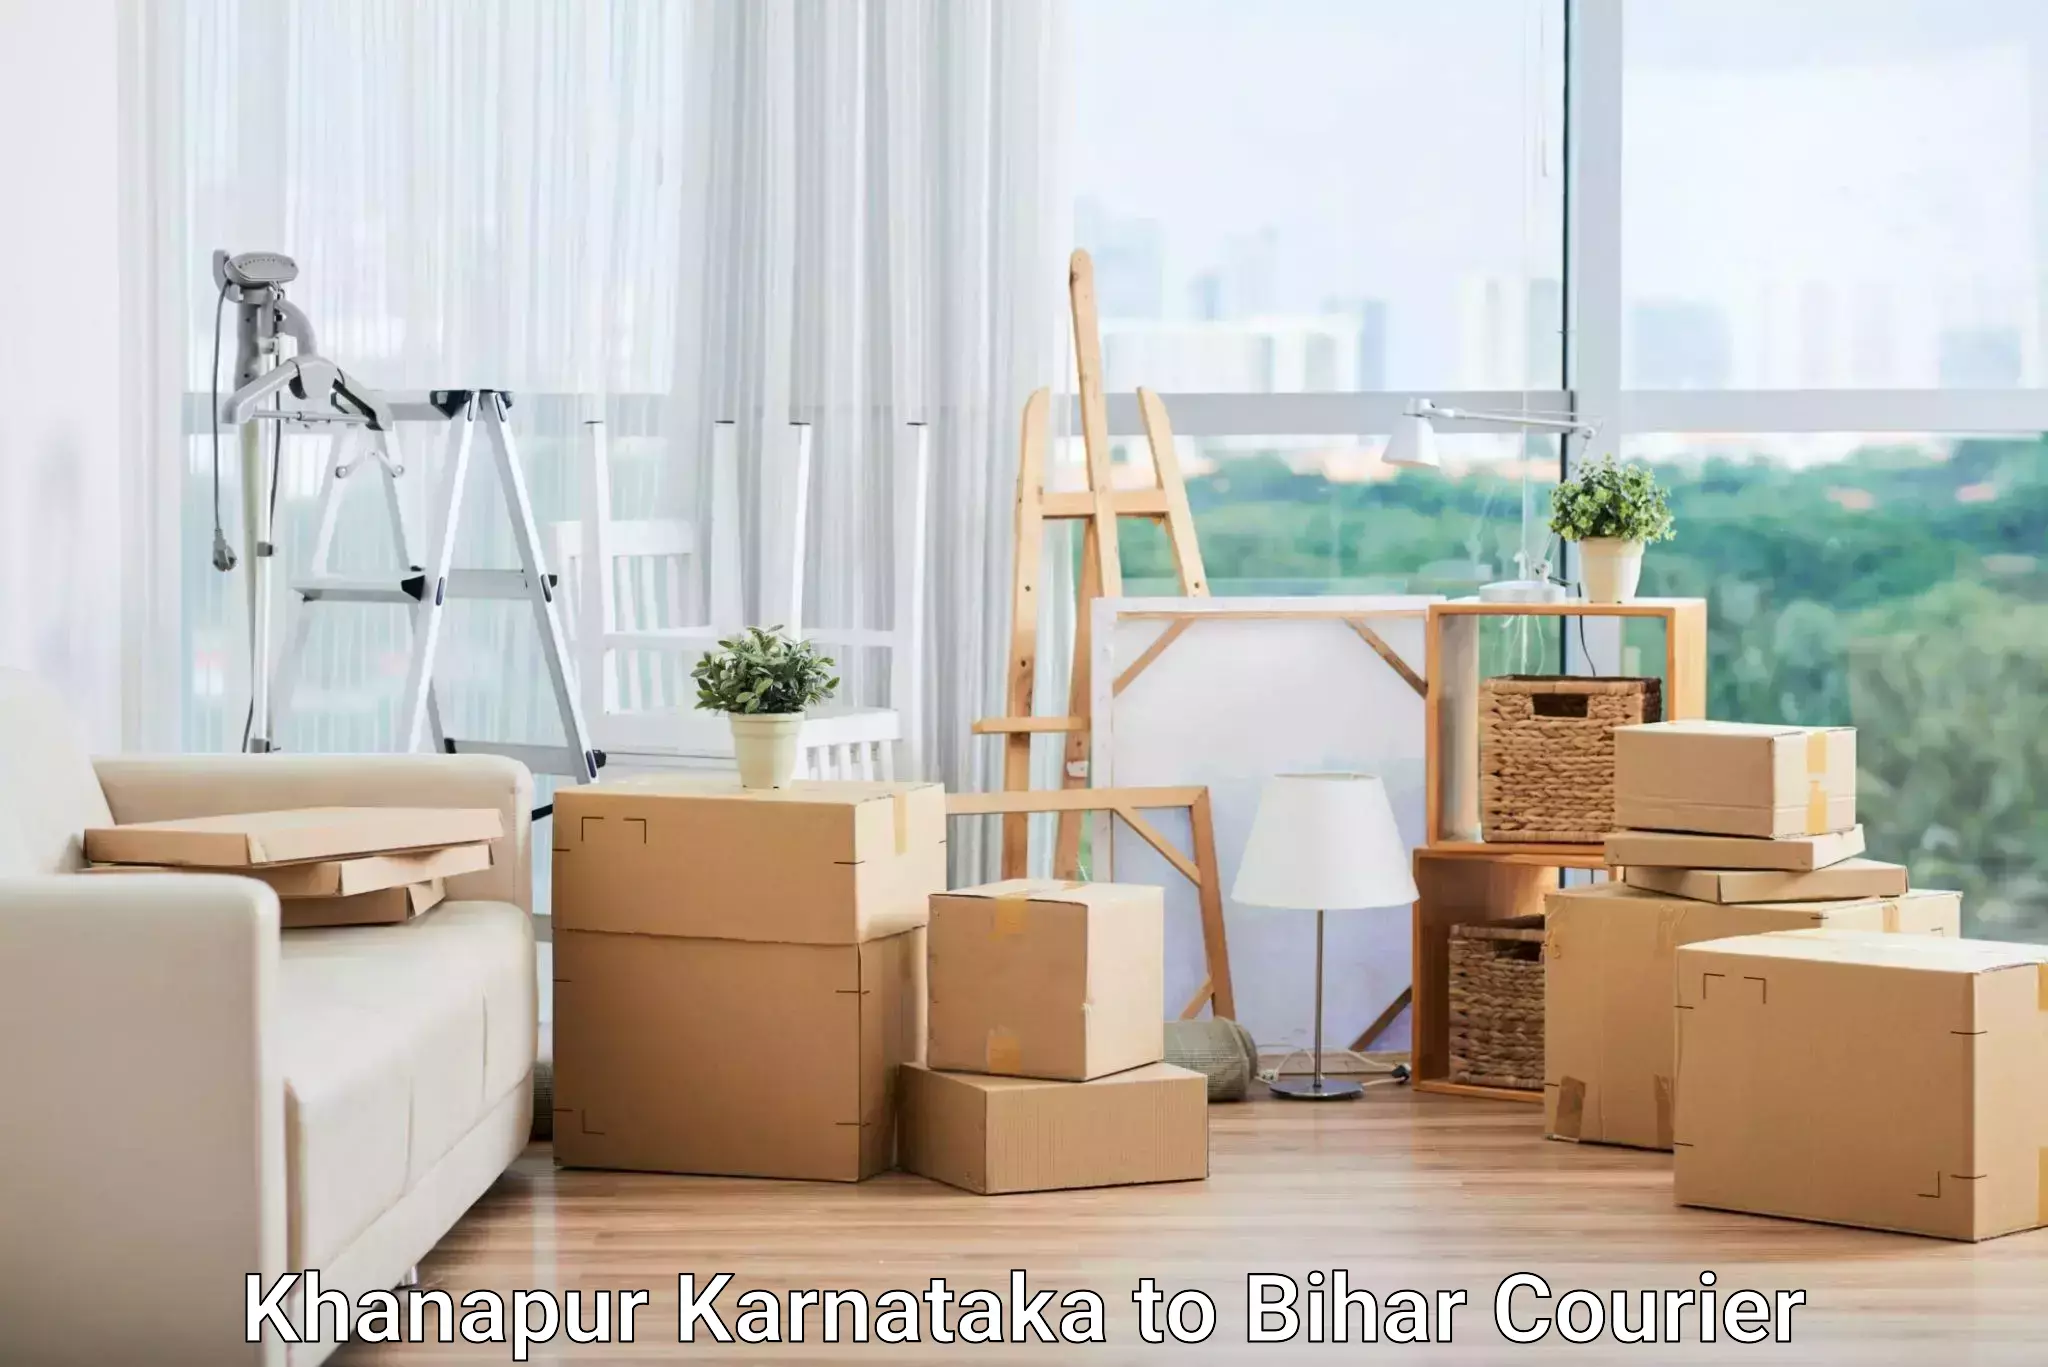 End-to-end delivery in Khanapur Karnataka to Parsauni